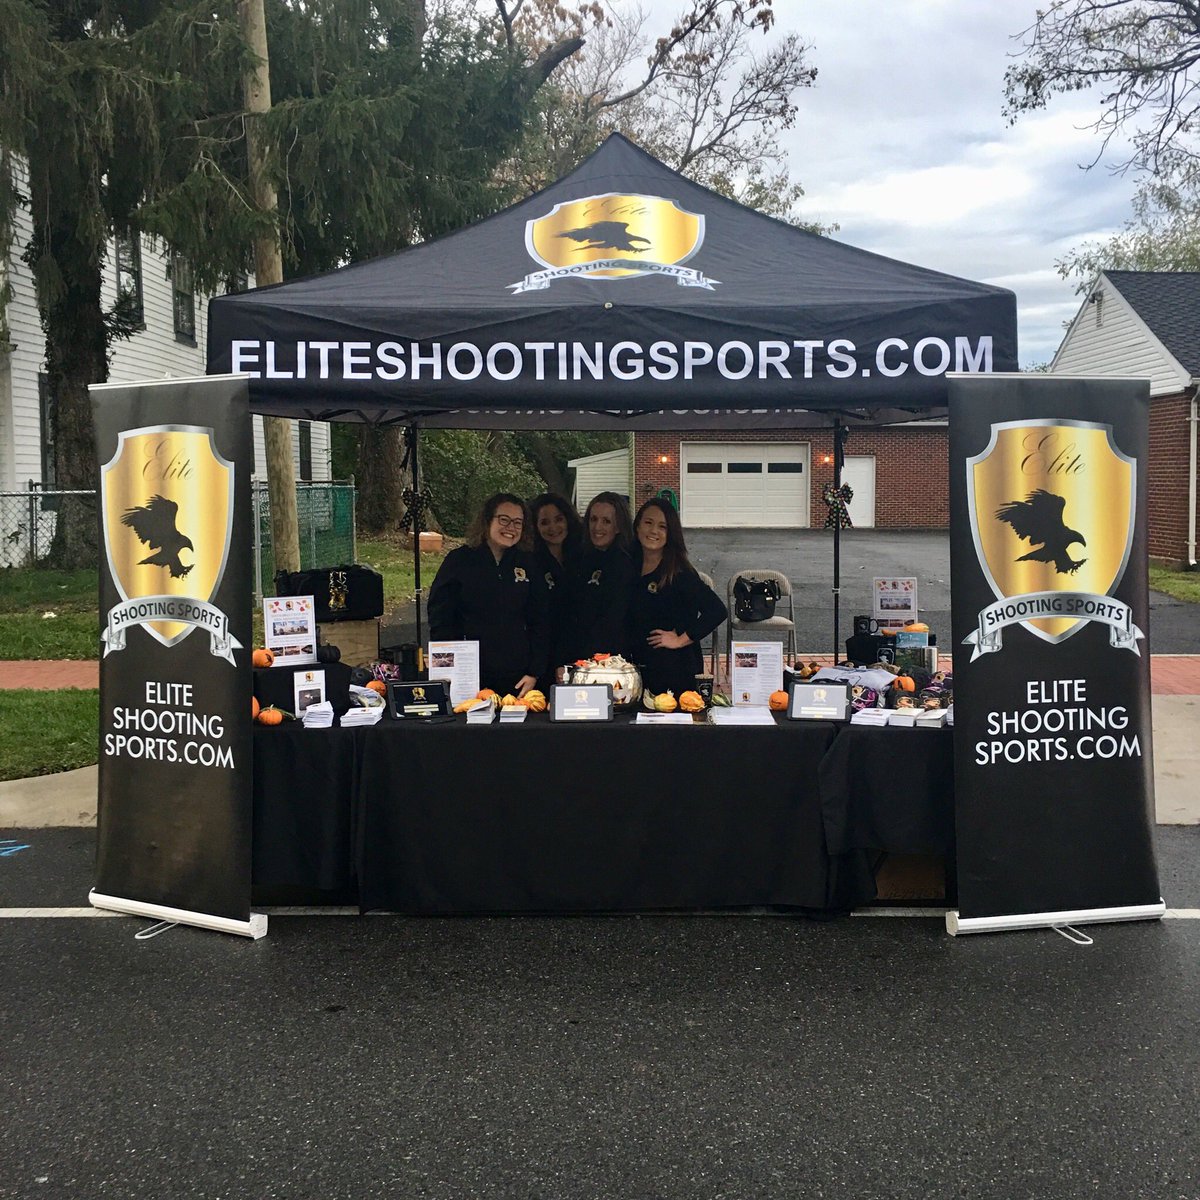 Hey folks! Come by the #EliteShootingSports booth here at the 30thAnnual #HaymarketDay & then head over to @ESSRange for some #TargetPractice #FamilyFun #RangeDay bit.ly/EliteRange #WinPrizes